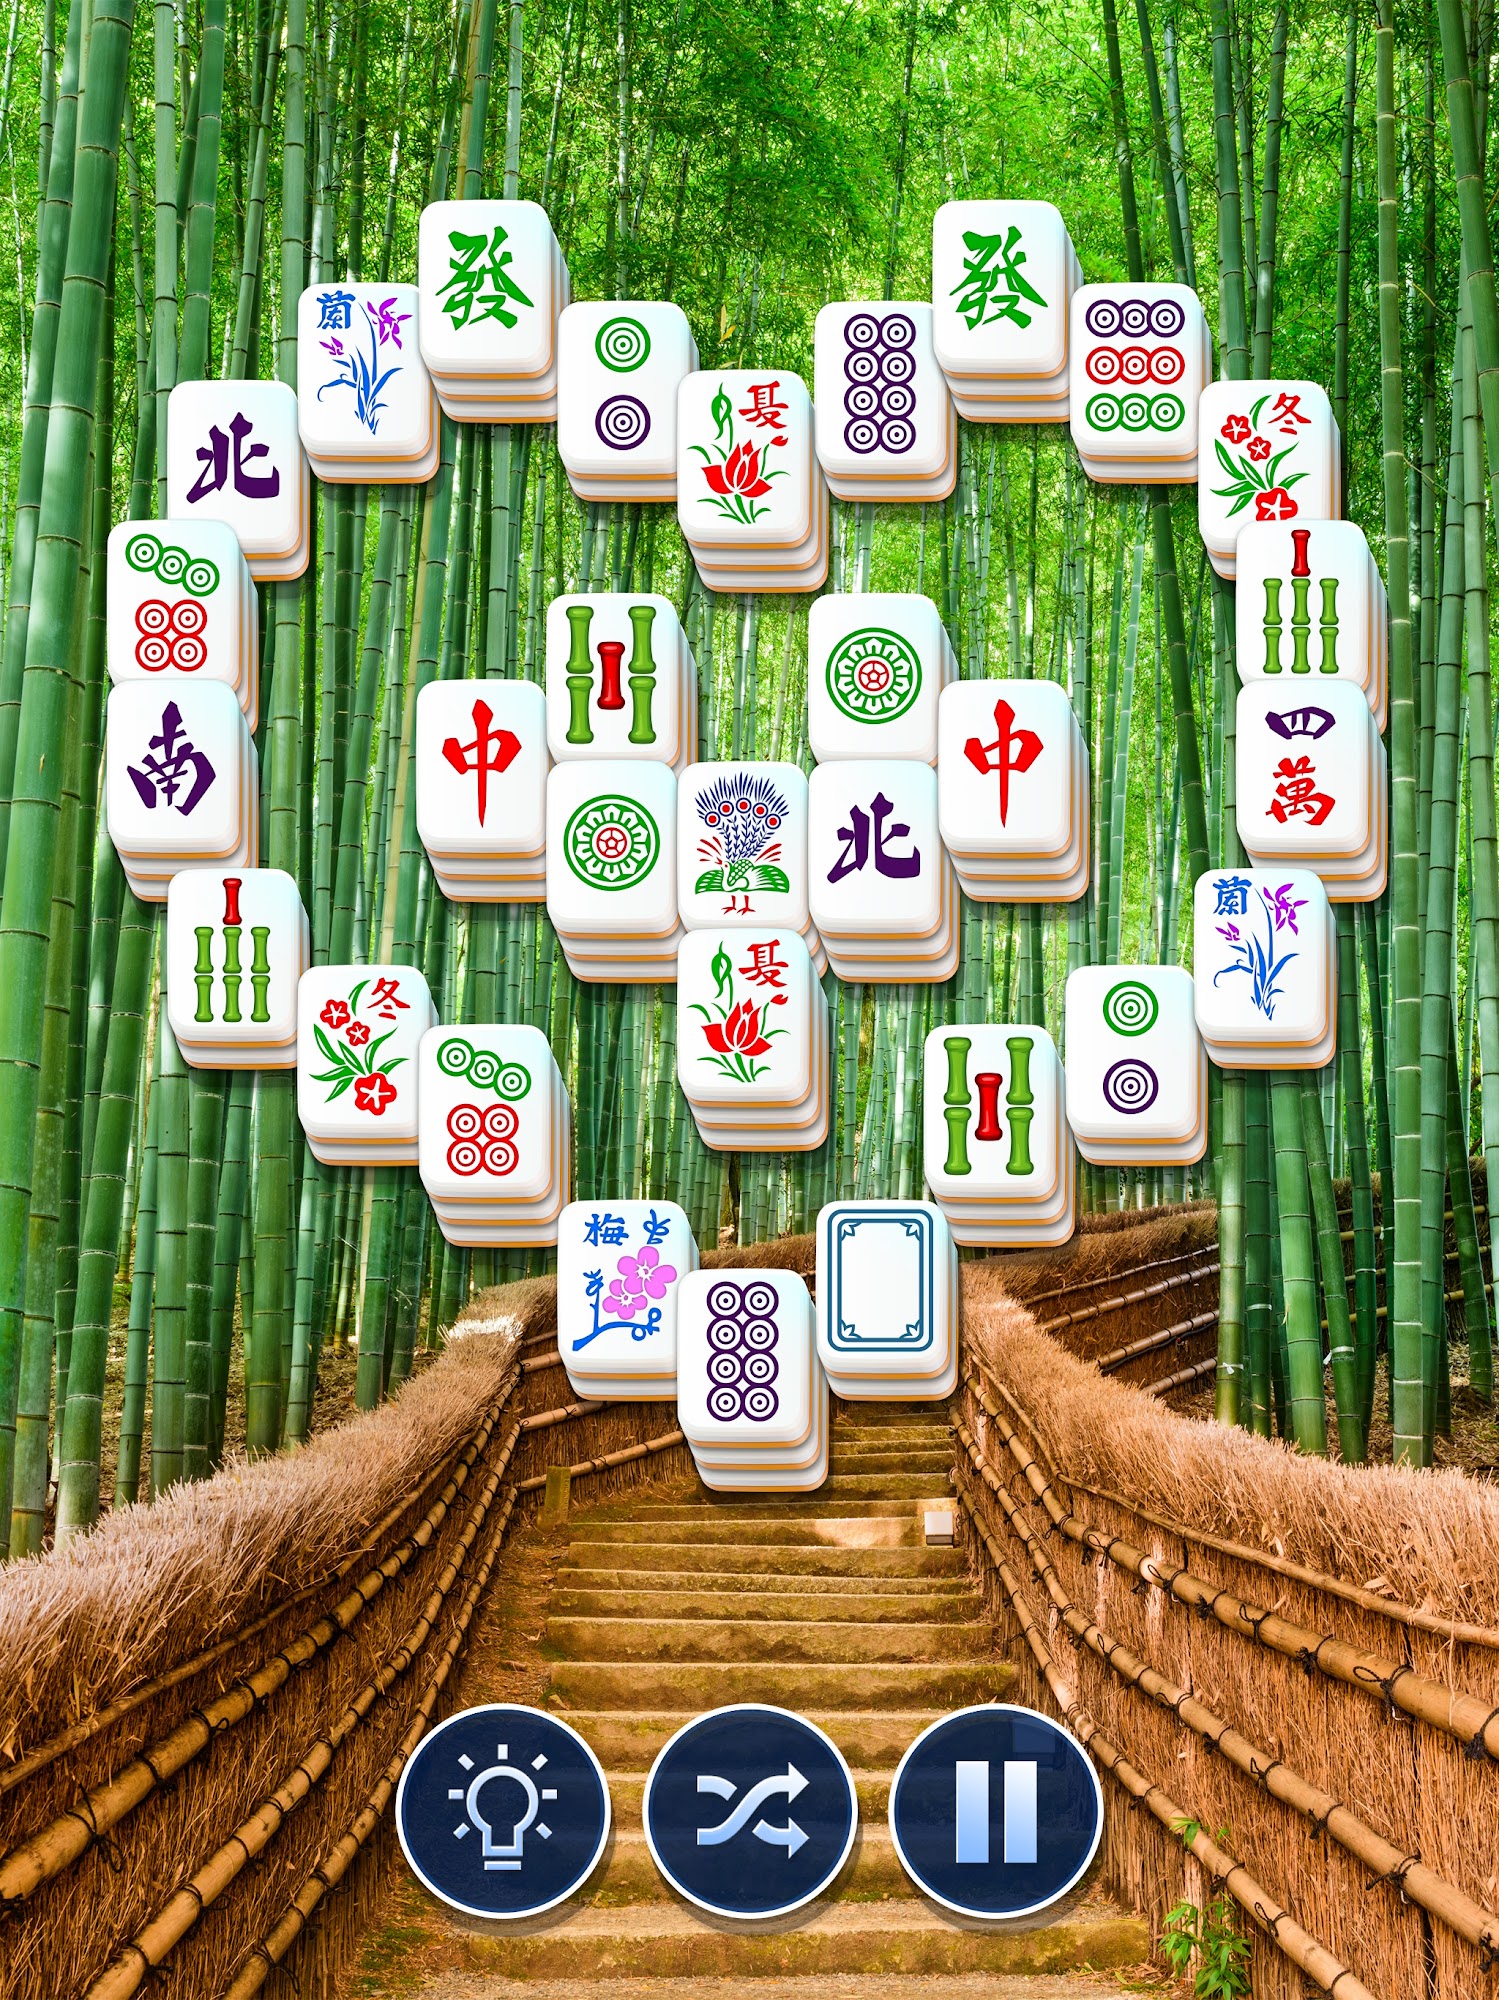 Mahjong Club - Solitaire Game - Android game screenshots.